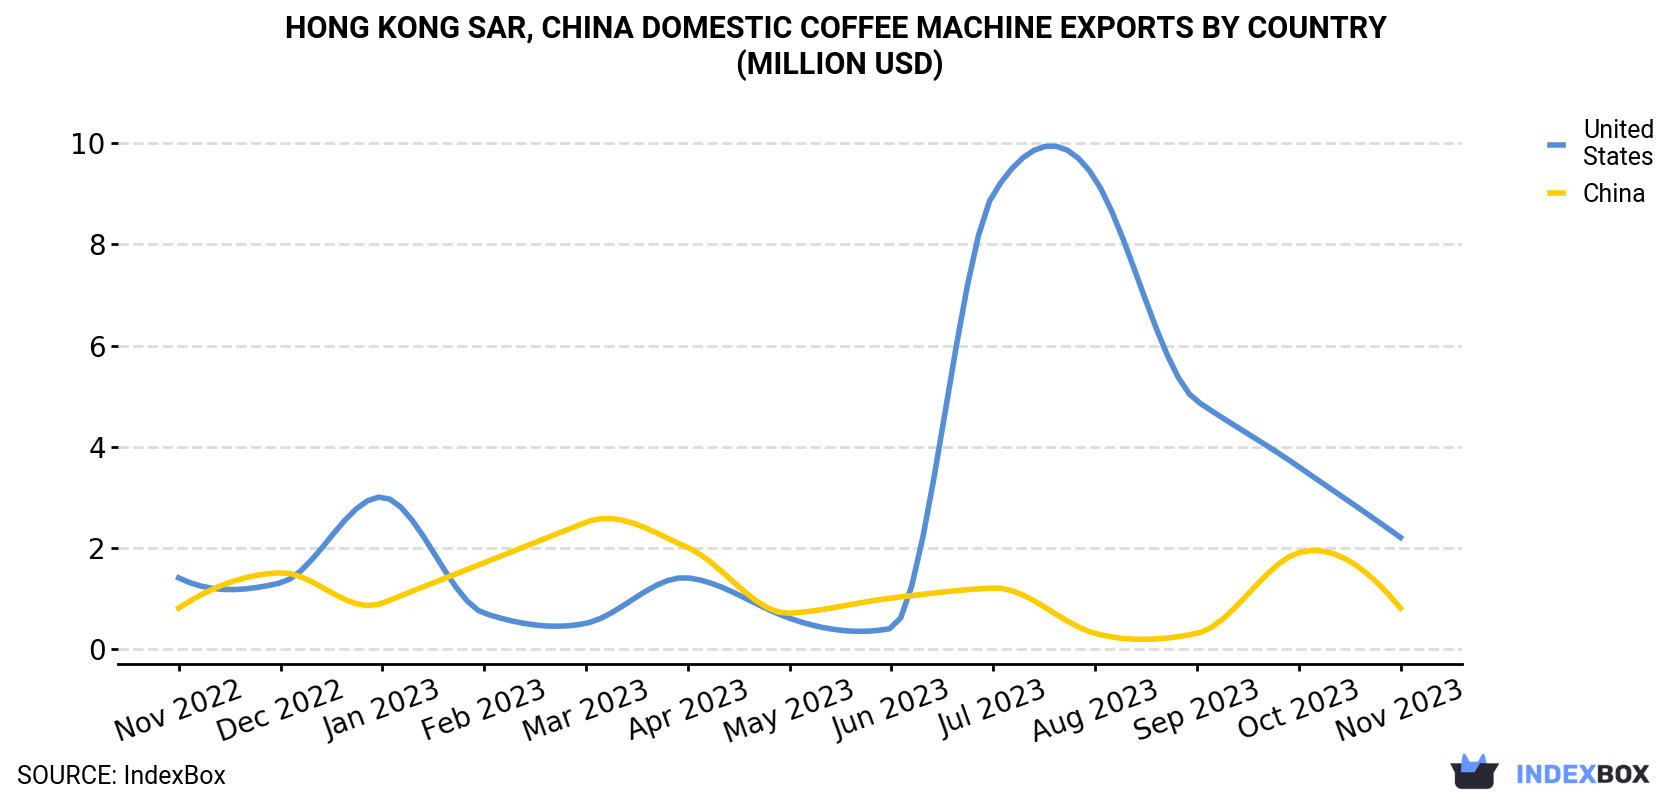 Hong Kong Domestic Coffee Machine Exports By Country (Million USD)